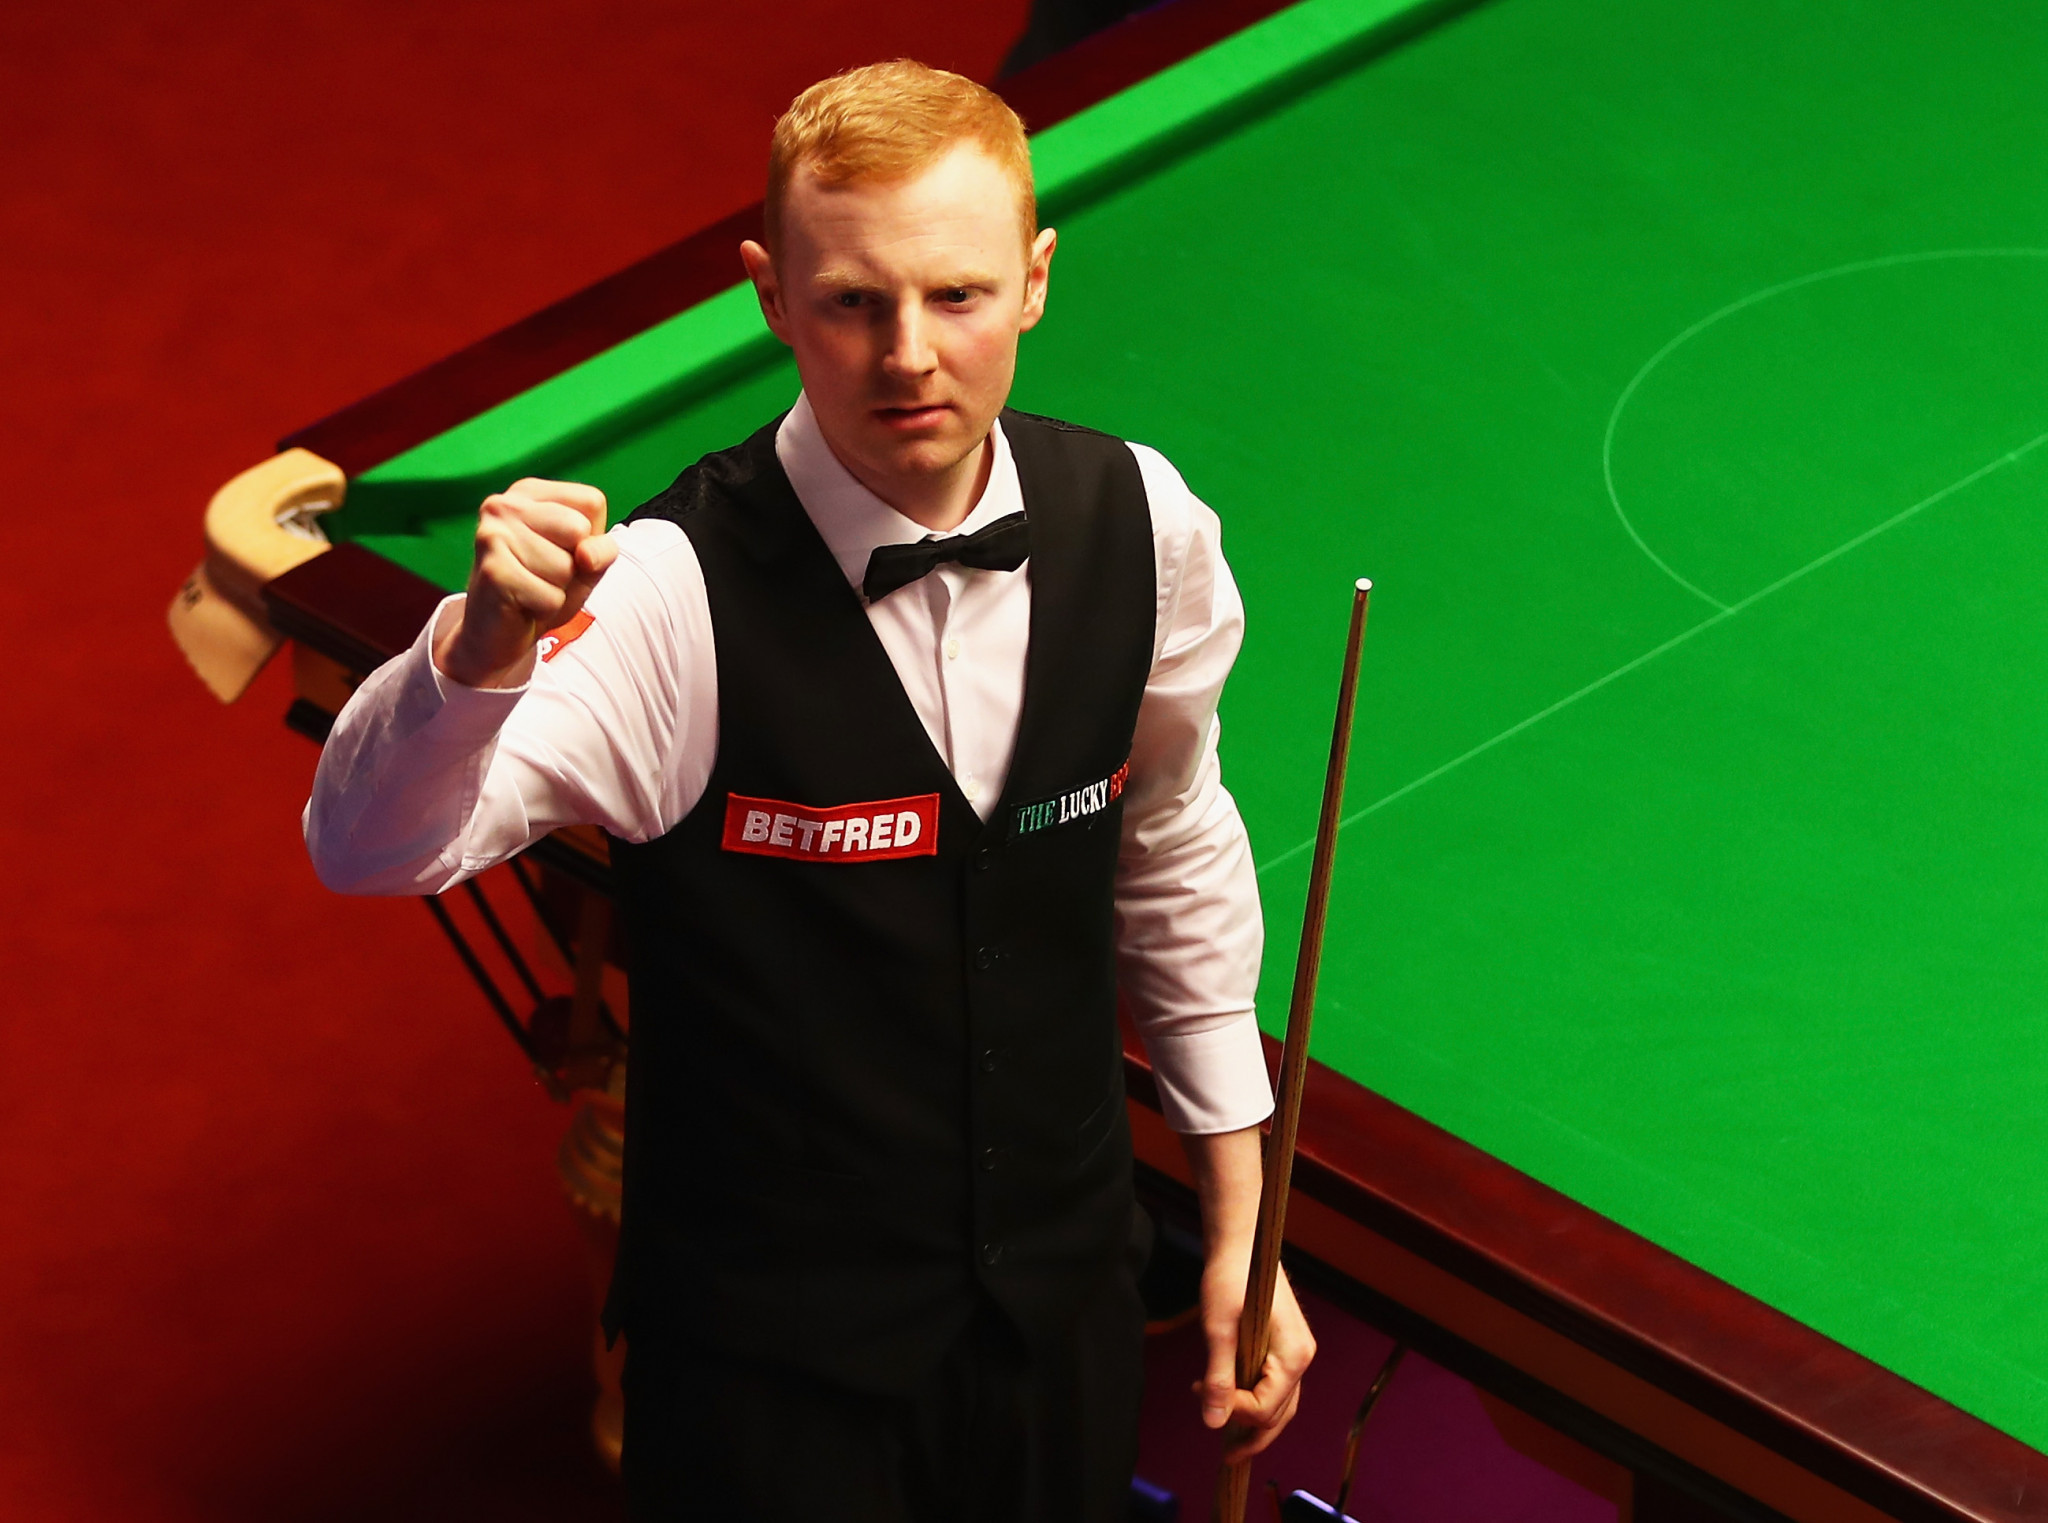 Qualifier Anthony McGill won a dramatic deciding frame to reach the quarter-finals of the World Snooker Championship ©Getty Images